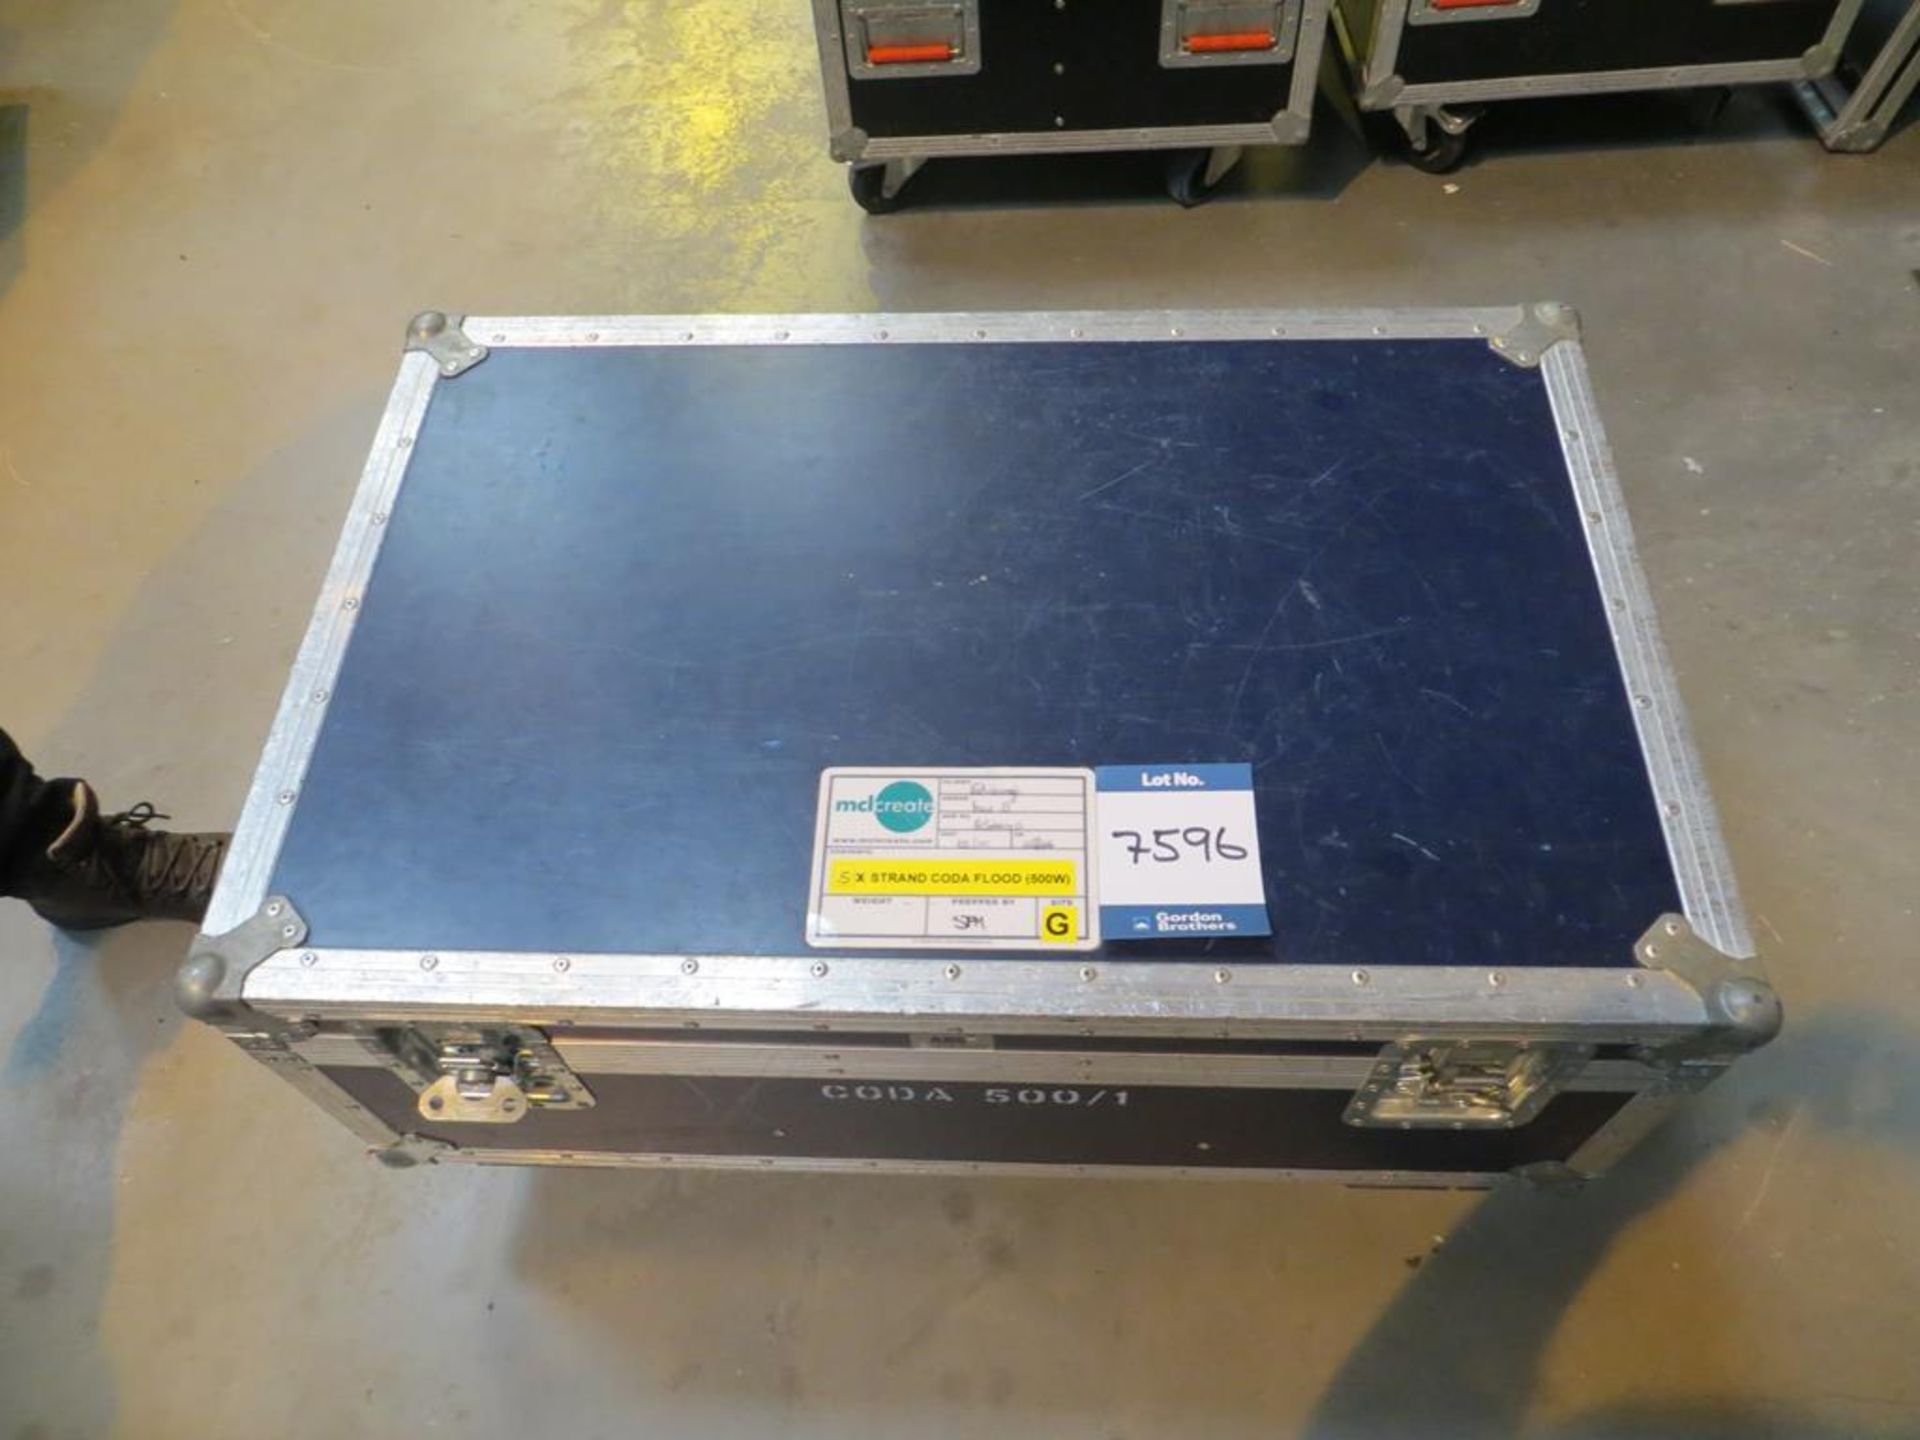 6x No. Strand, Code 500/1 Tungsten floodlight with mounting clamp in transit case: Unit C - Image 3 of 3